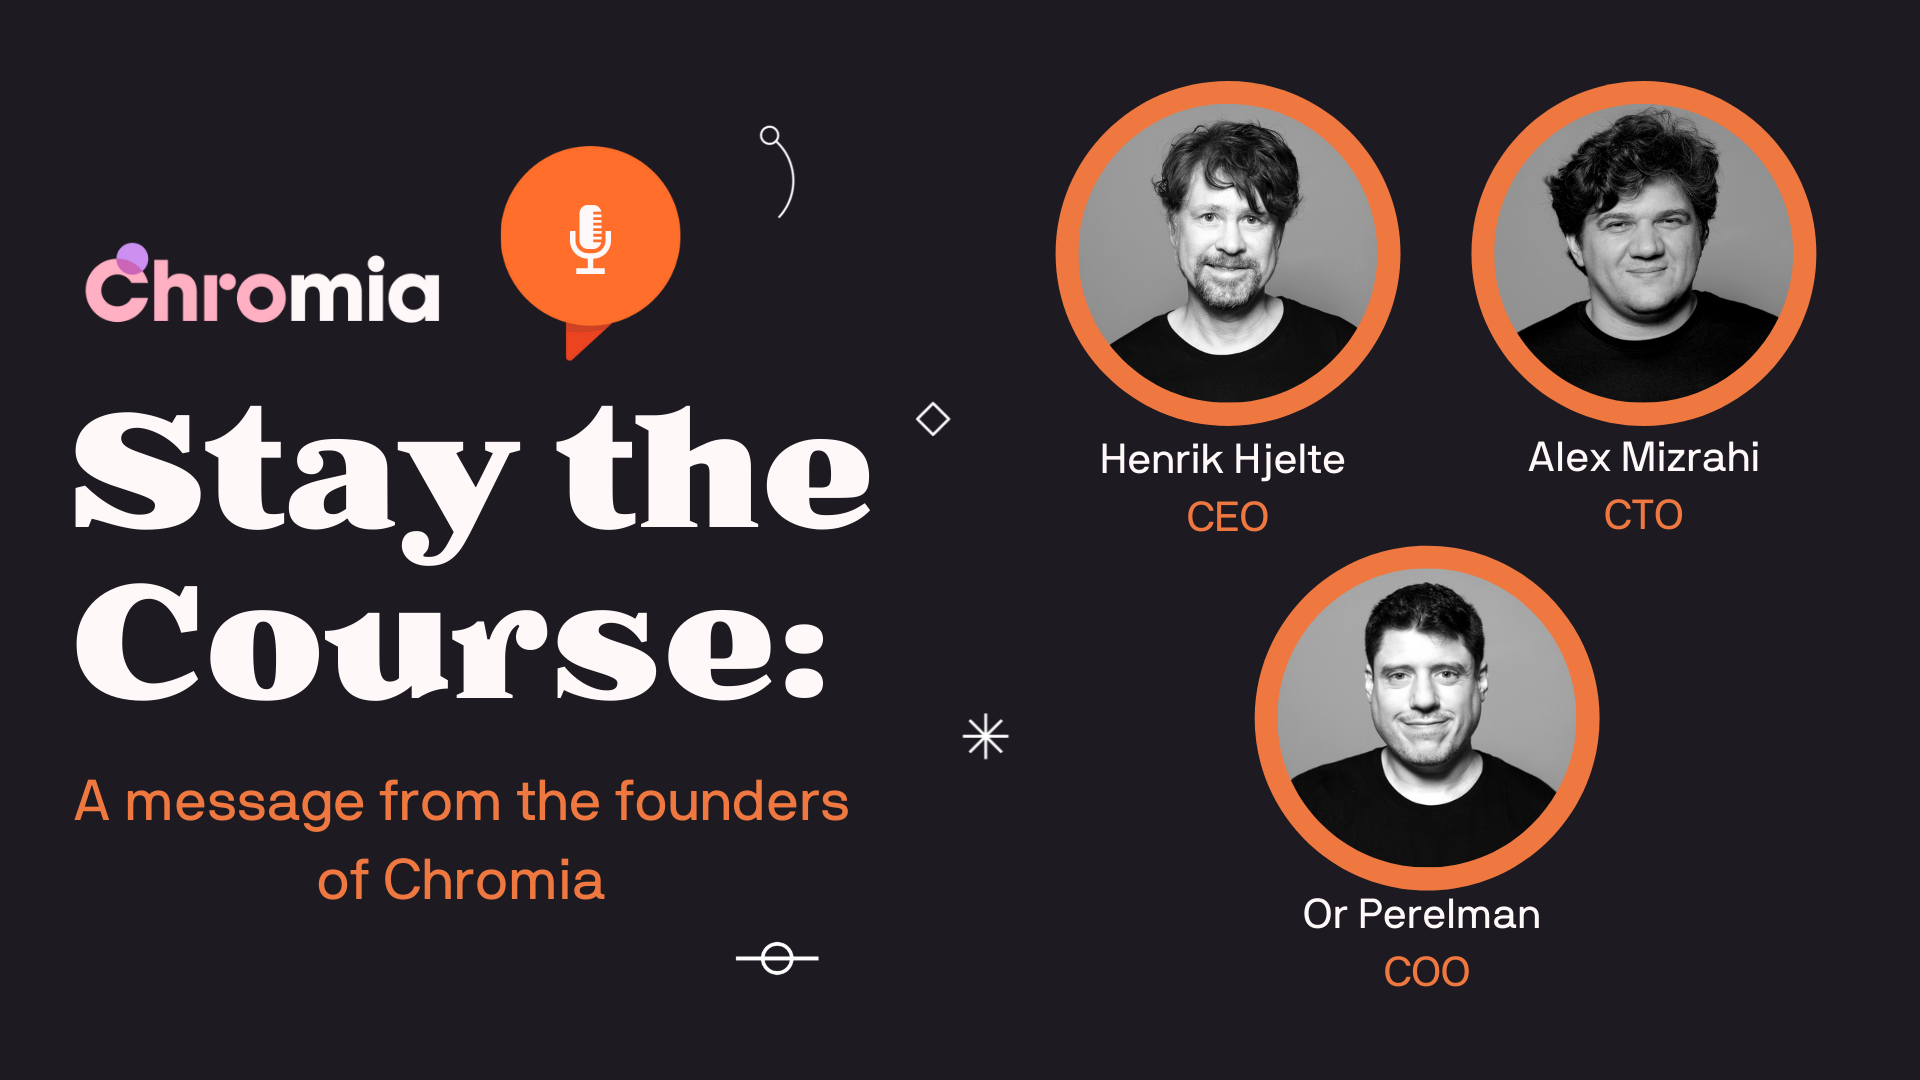 Stay the Course: A message from the founders of Chromia